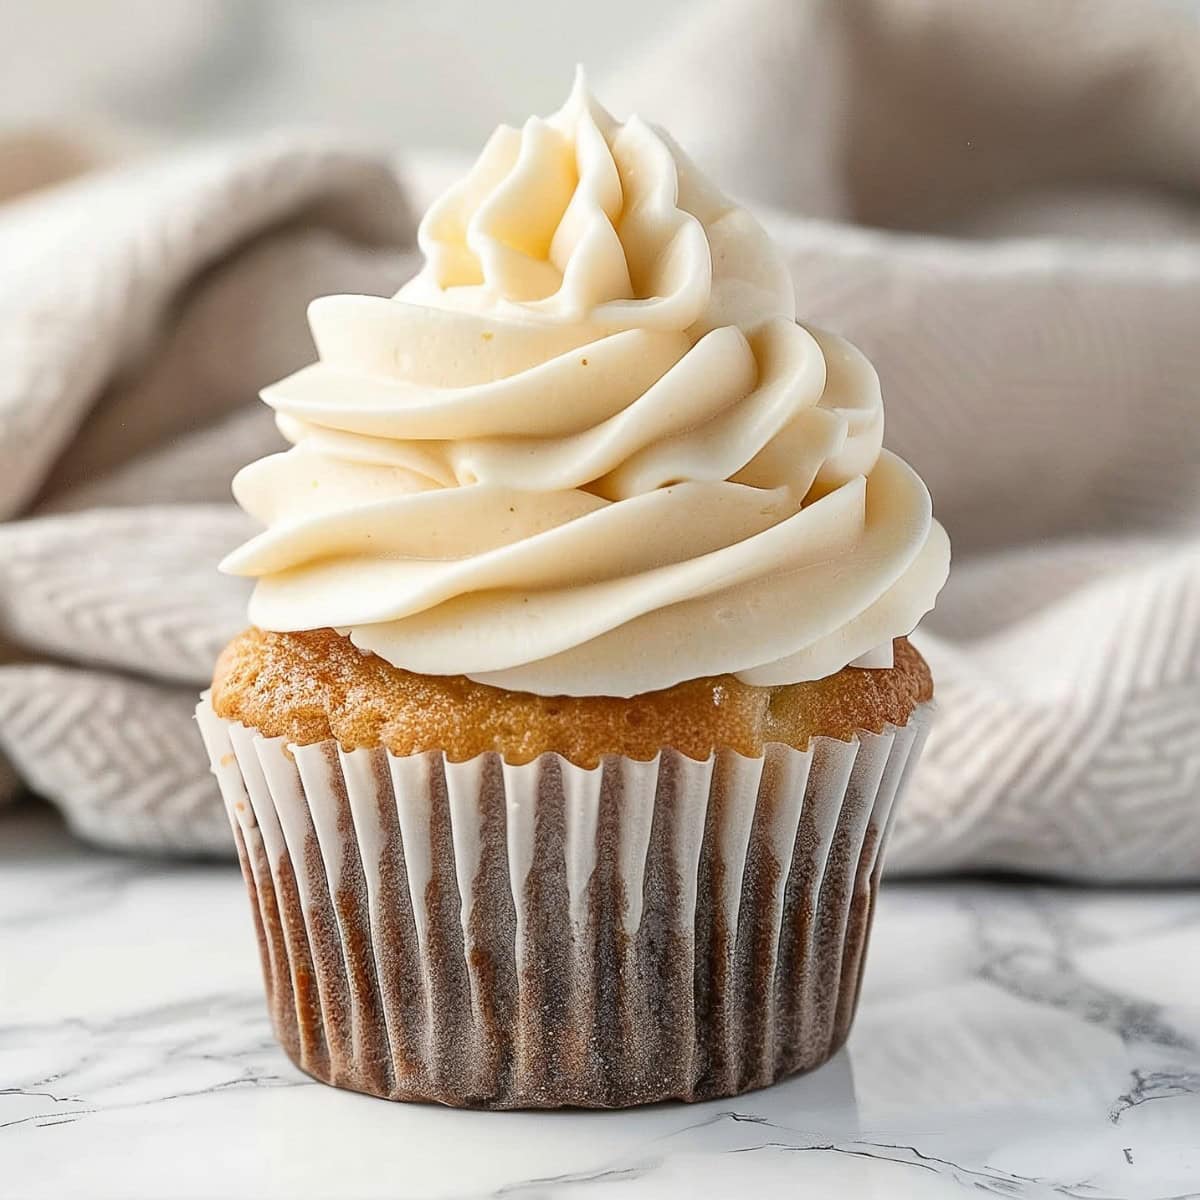 A fluffy vanilla cupcake topped with peanut butter frosting